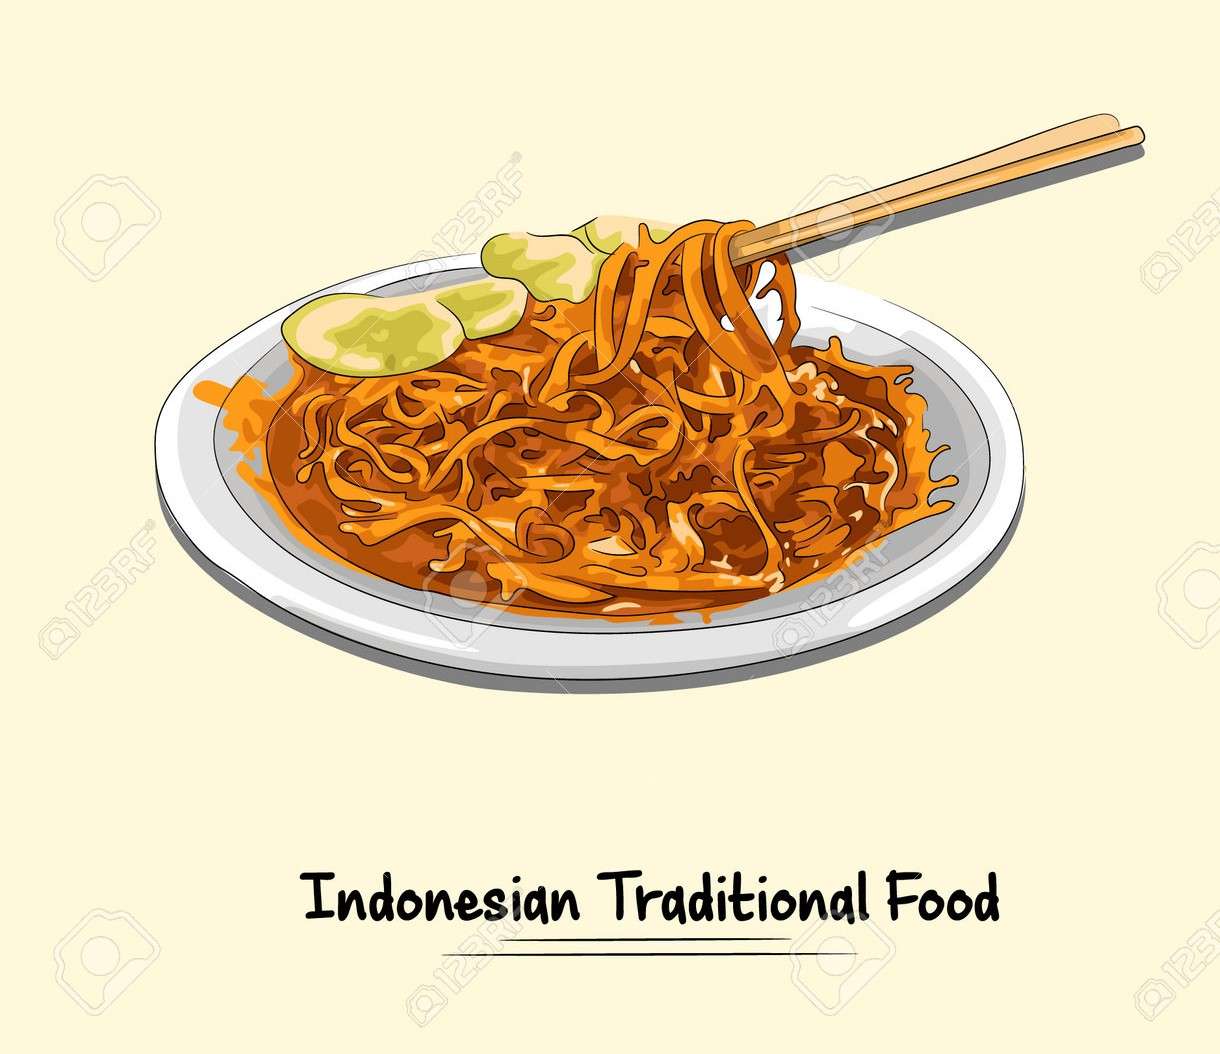 MIE ACEH puzzle online from photo